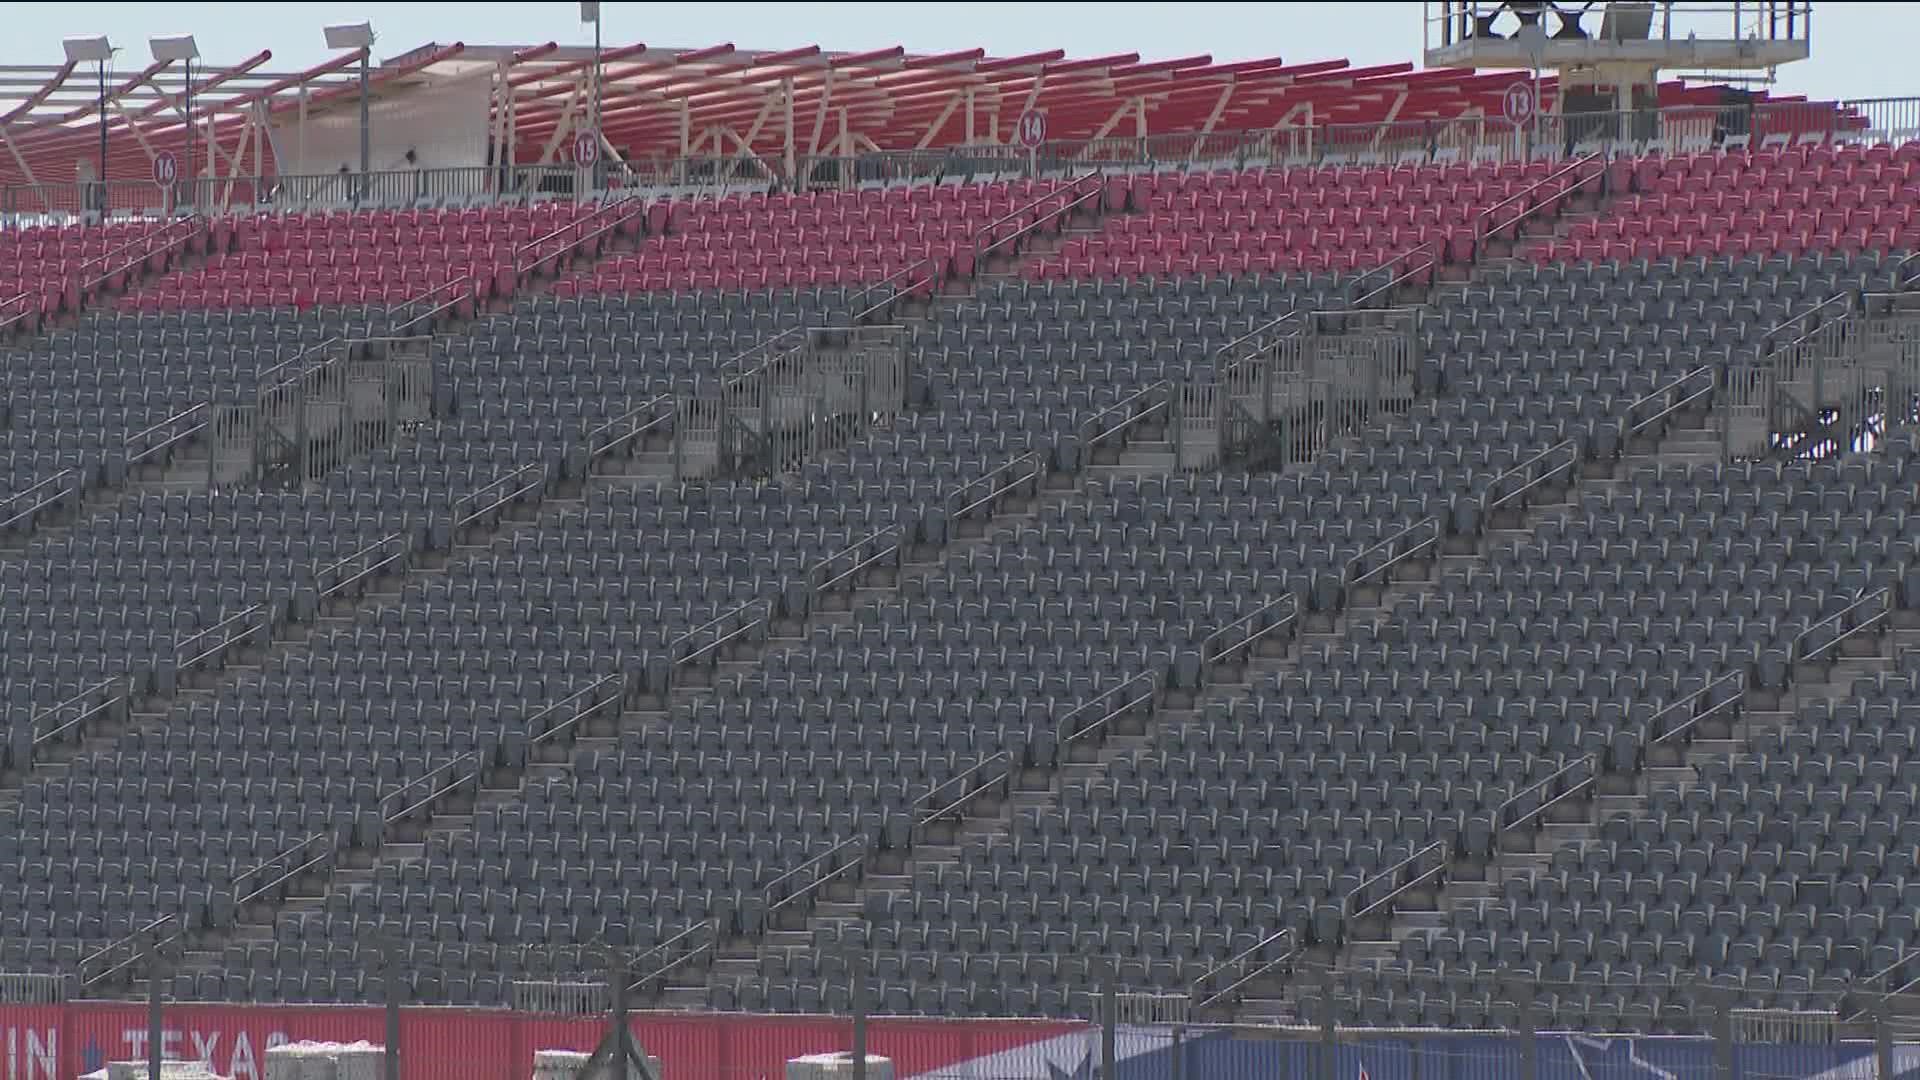 The Circuit of the Americas is expecting more than 100,000 people per day this weekend.